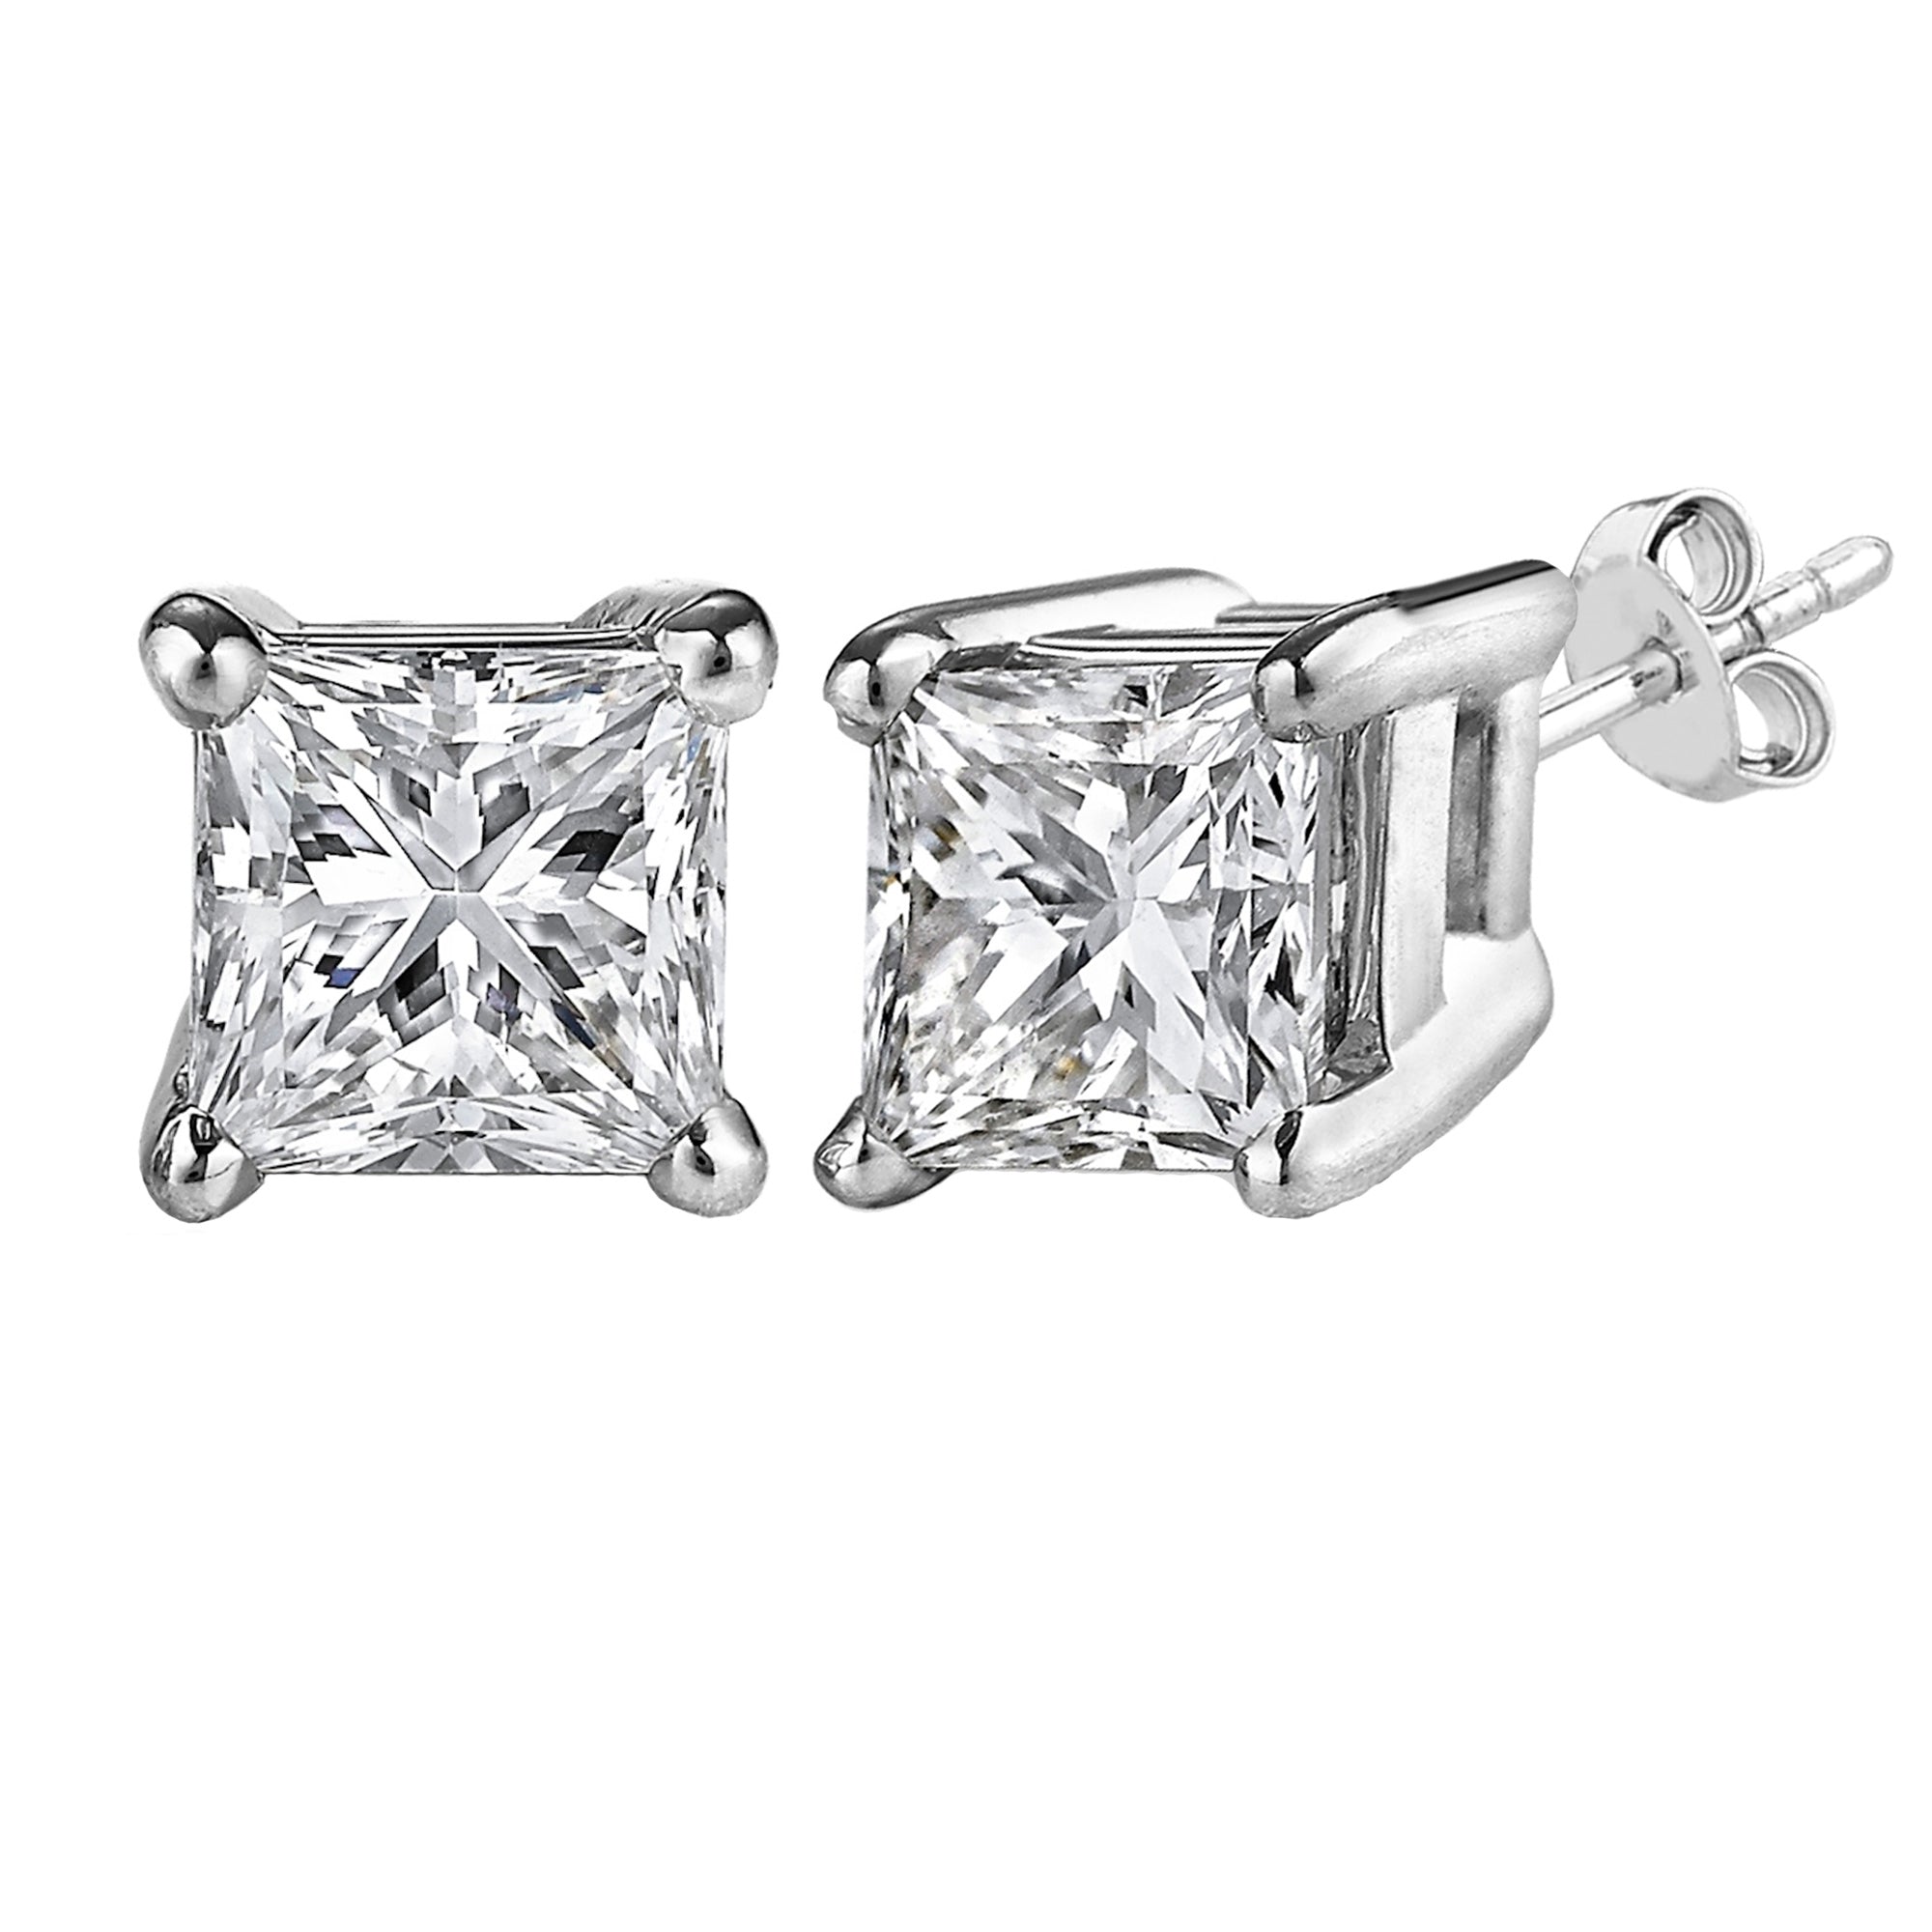 Sterling Silver Rhodium Finish Princess Cut Cubic Zirconia Stud Earring fine designer jewelry for men and women